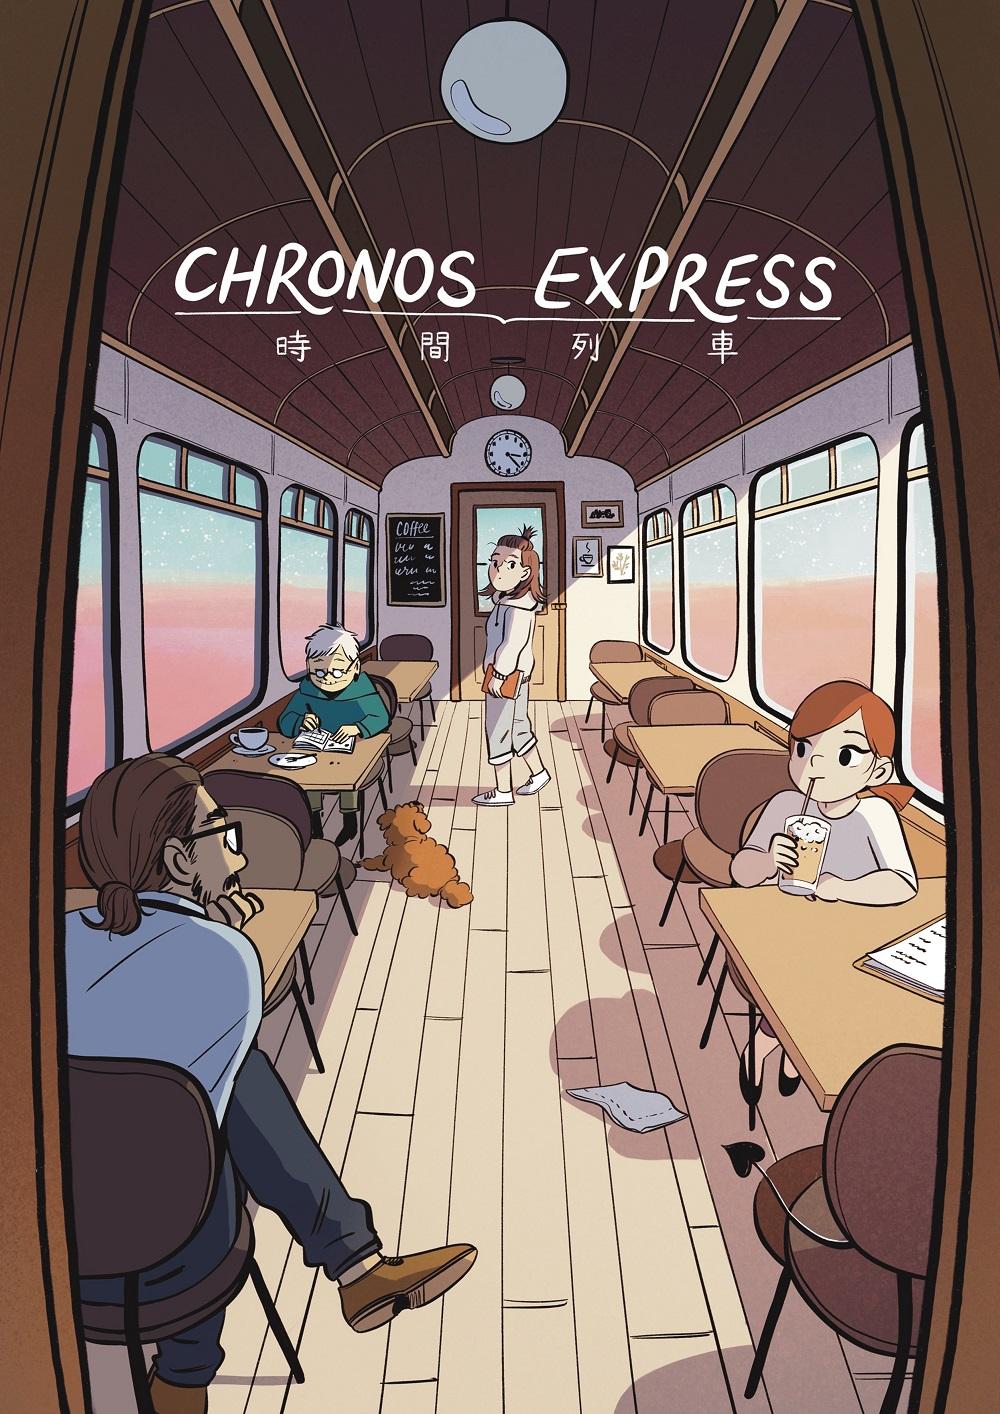 The Secretary for Culture, Sports and Tourism, Mr Kevin Yeung, today (December 28) congratulated Hong Kong comics artist Bonnie Pang on claiming the Silver Award at the 17th Japan International MANGA Award with her work, "Chronos Express". Picture shows the comic, "Chronos Express" (provided by the Hong Kong Comics and Animation Federation).